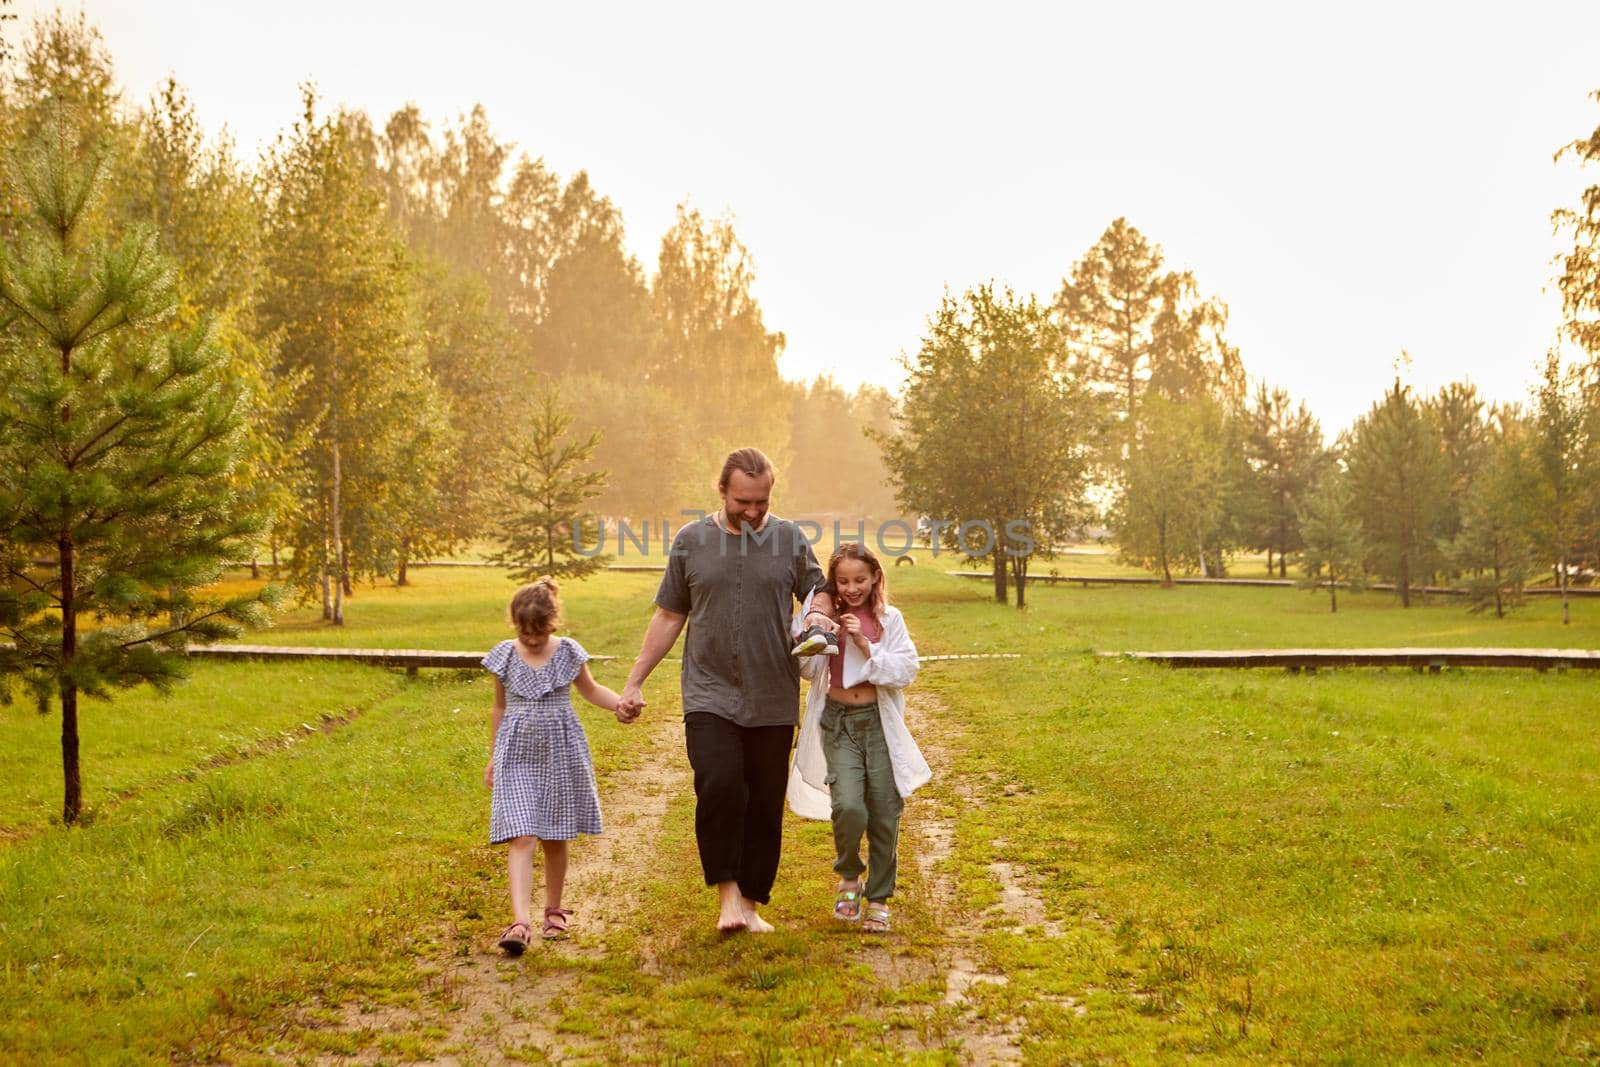 Father walking with daughters in countryside in sunset by Demkat